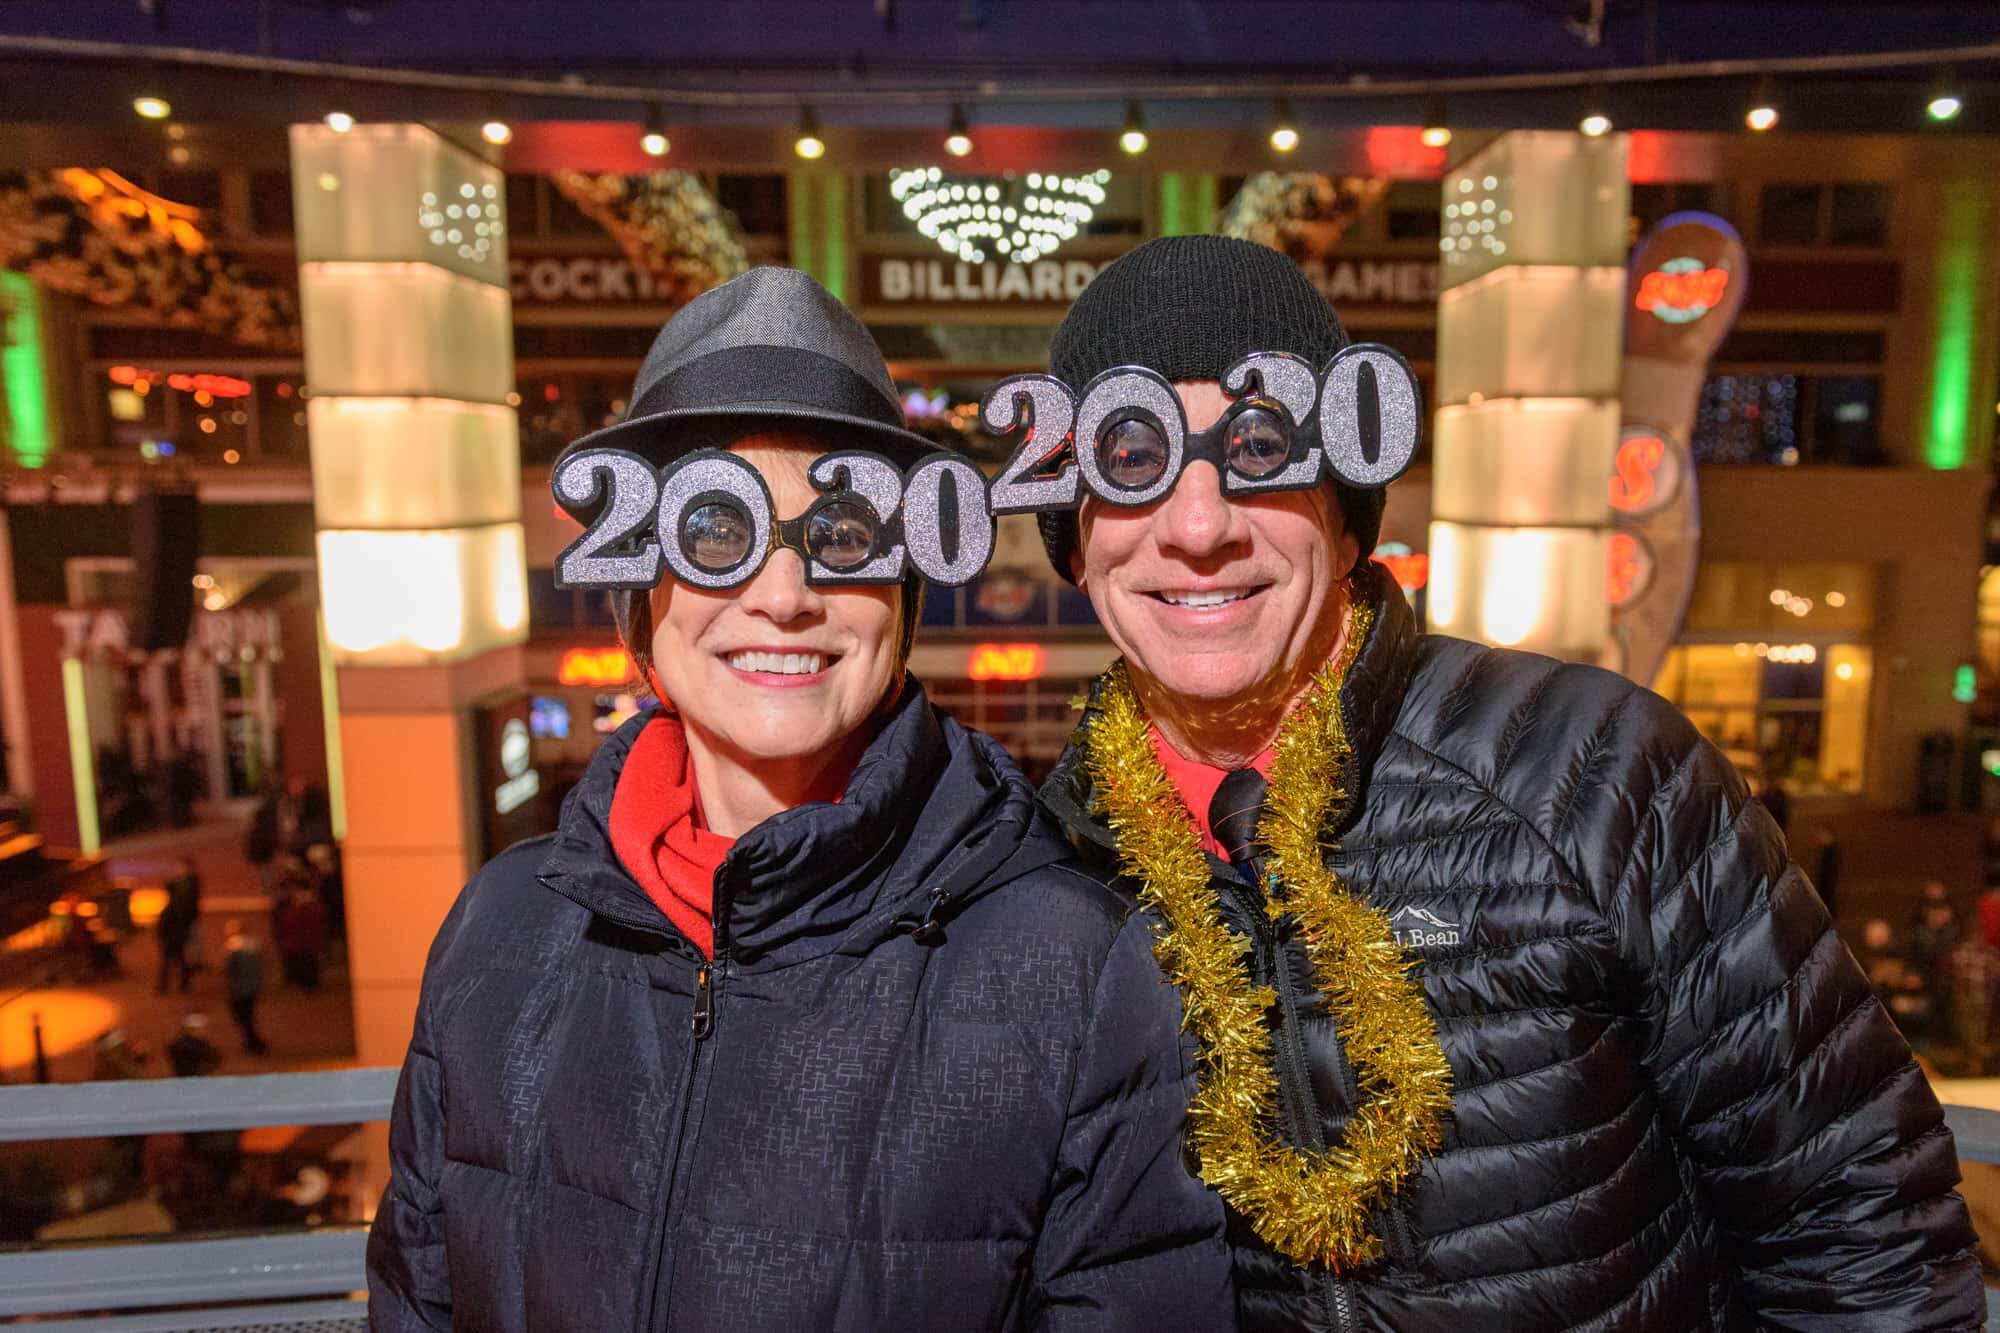 The New Year’s Eve celebration at Fourth Street Live!, Tuesday Dec. 31, 2019 in Louisville, Ky. (Photo by Brian Bohannon)